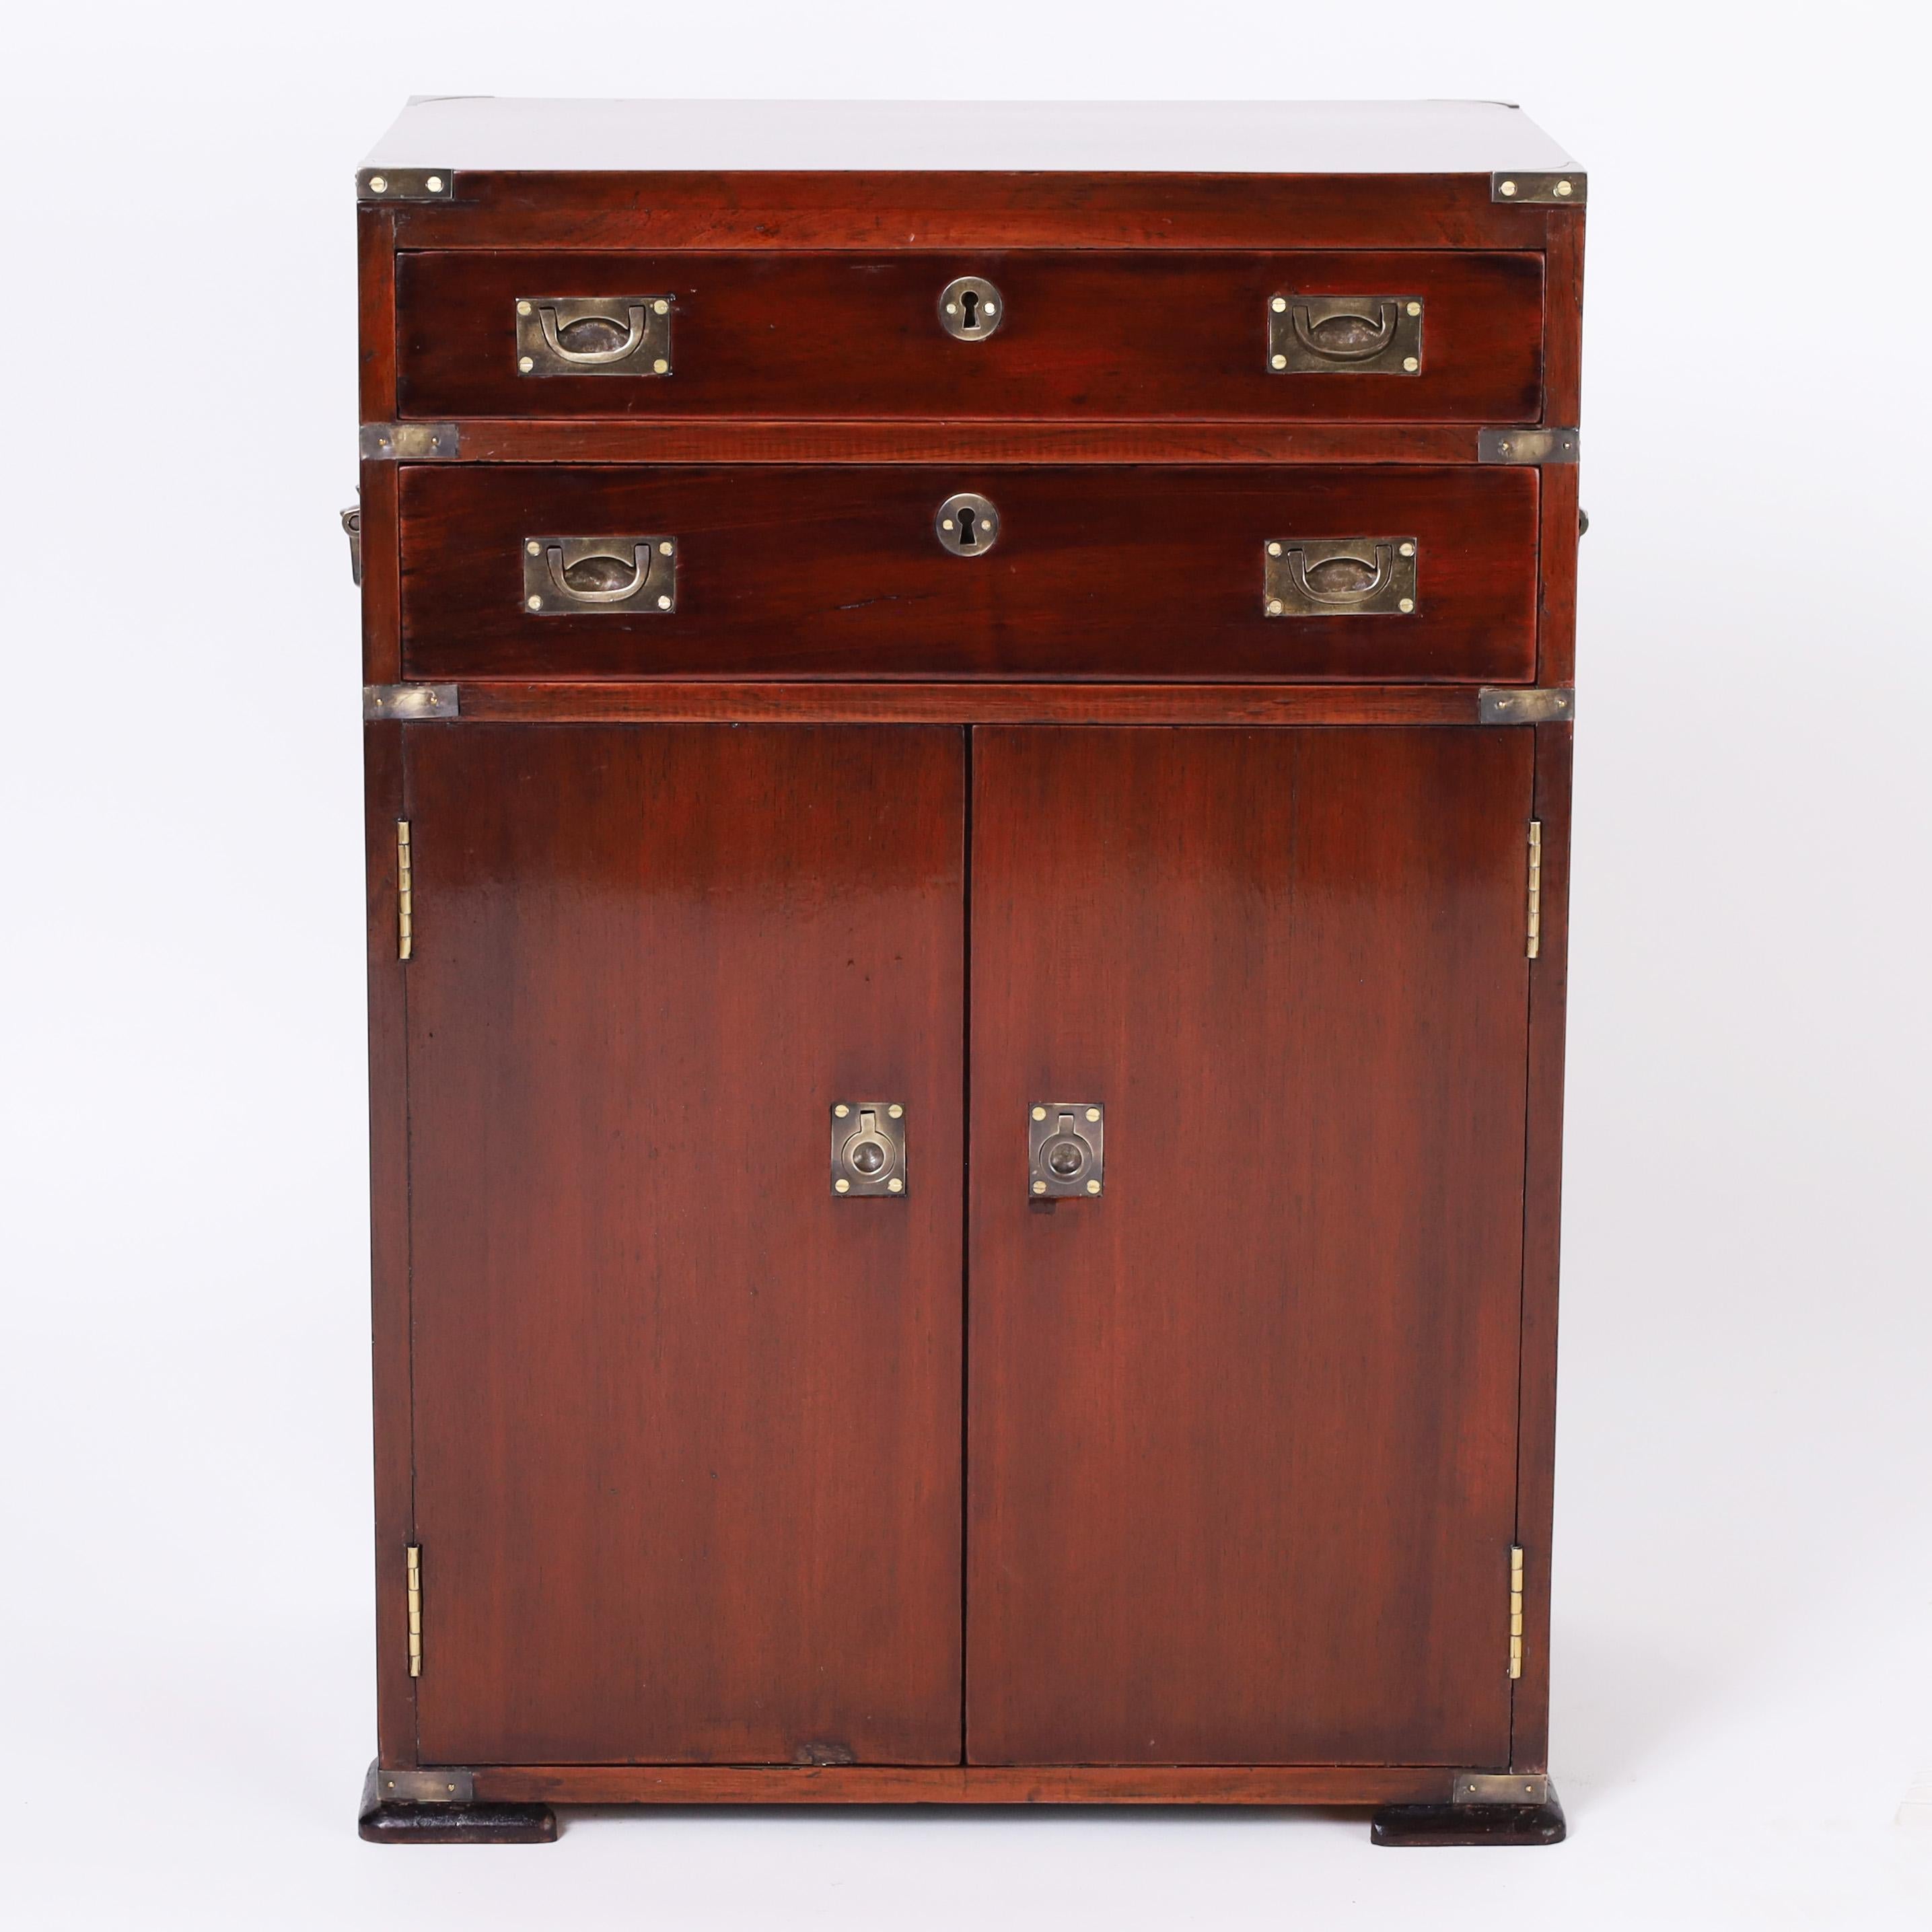 Handsome antique Anglo Indian campaign cabinet crafted in mahogany featuring a finish French polished in the traditional old world manner, brass hardware, two drawers, and pad feet. Interesting note this piece passed through an antique auction in